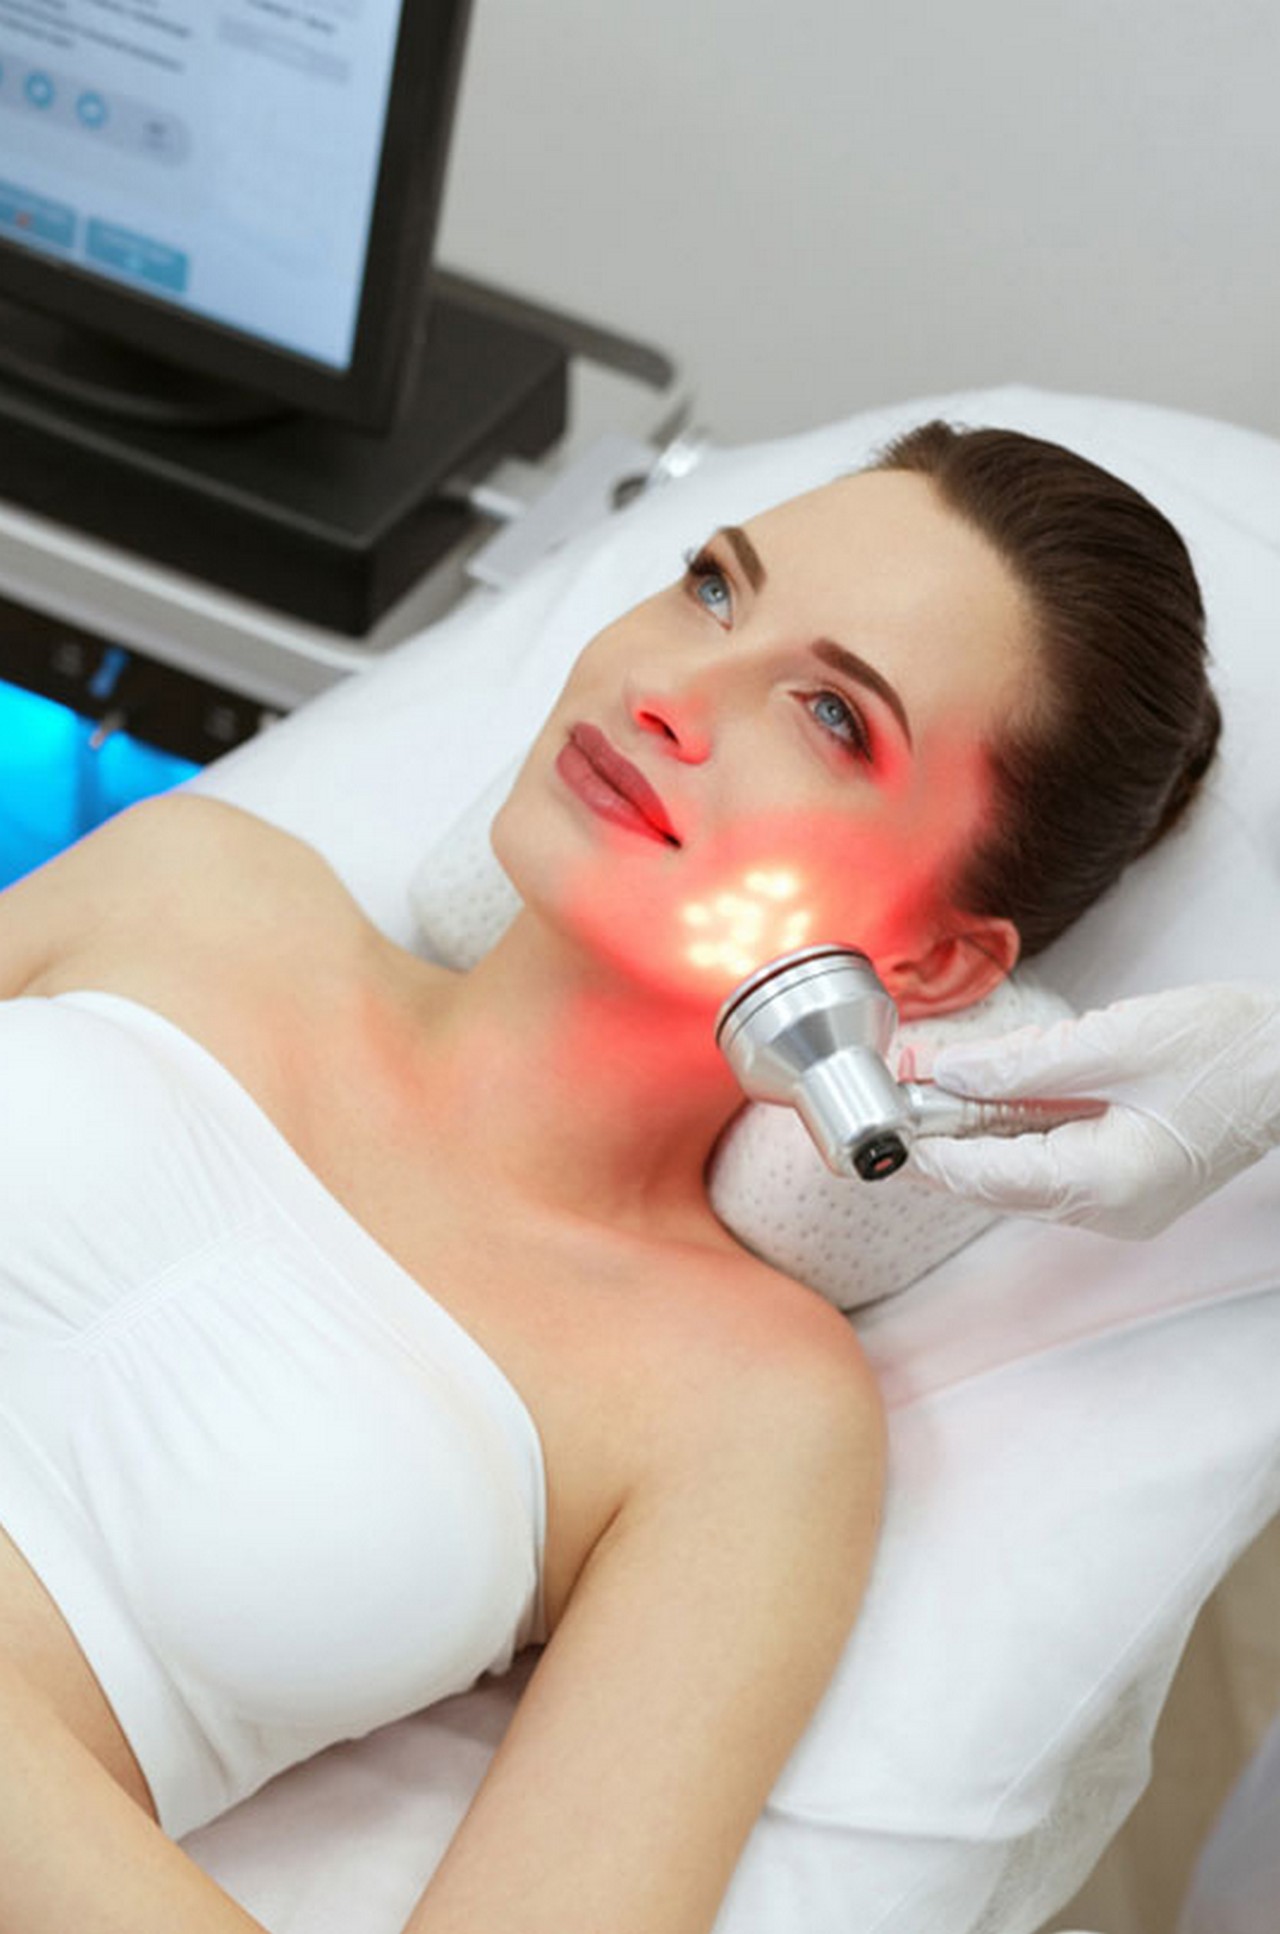  11 Red Light Therapy Benefits For Skin, Hair, and Health